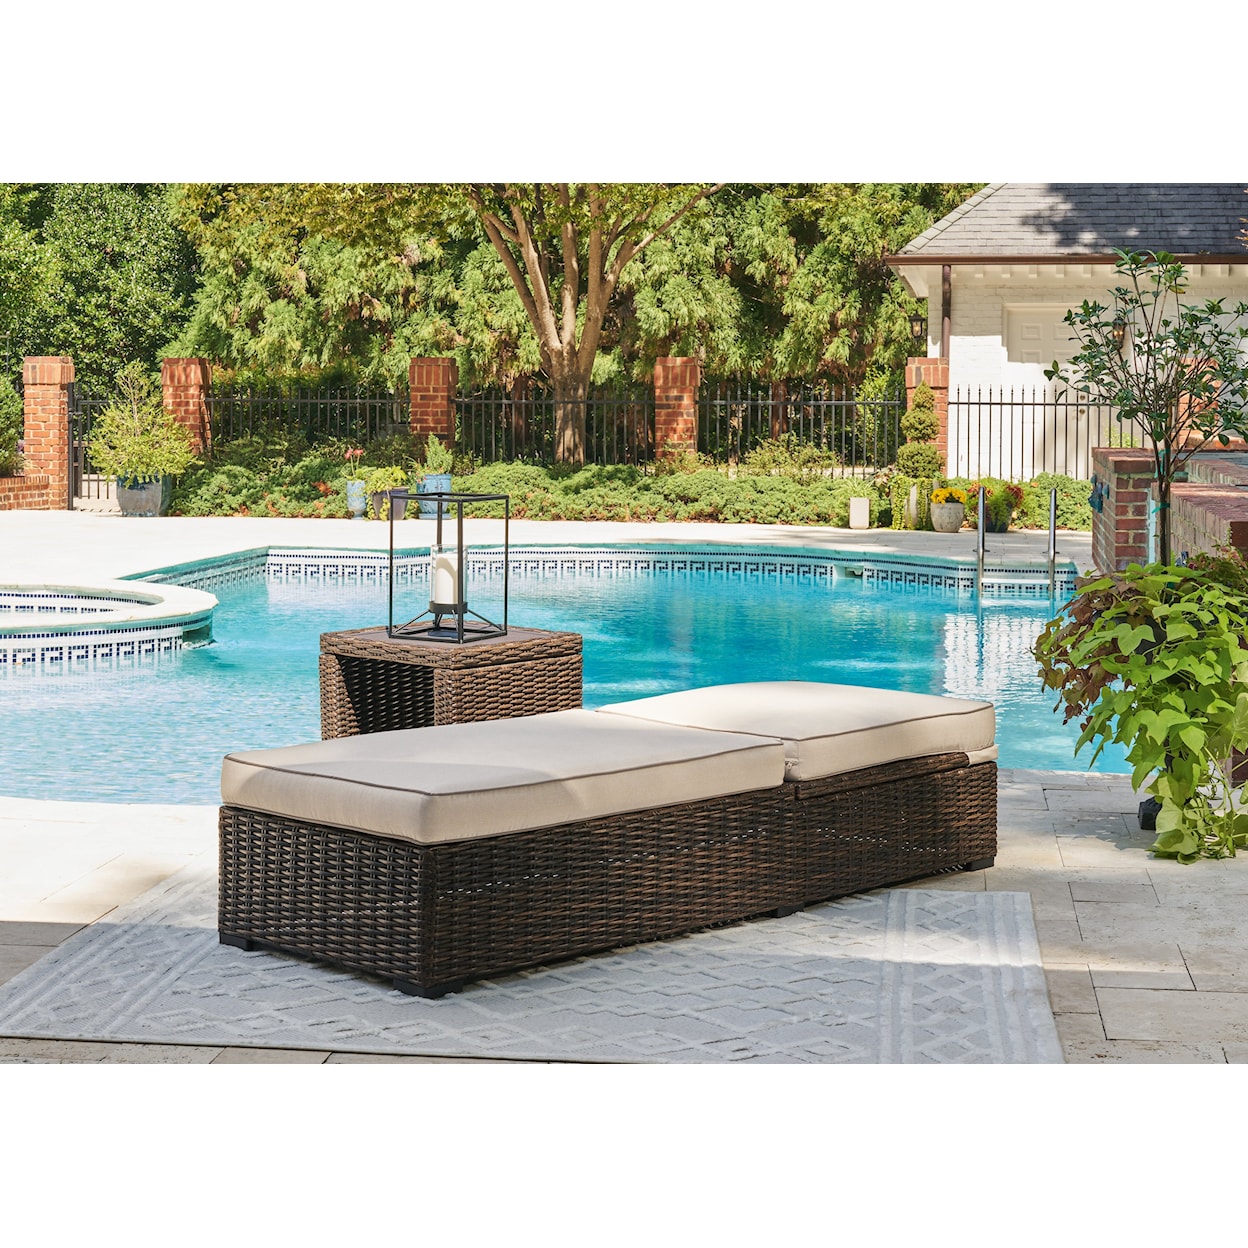 Signature Design by Ashley Coastline Bay Outdoor Chaise Lounge With Cushion